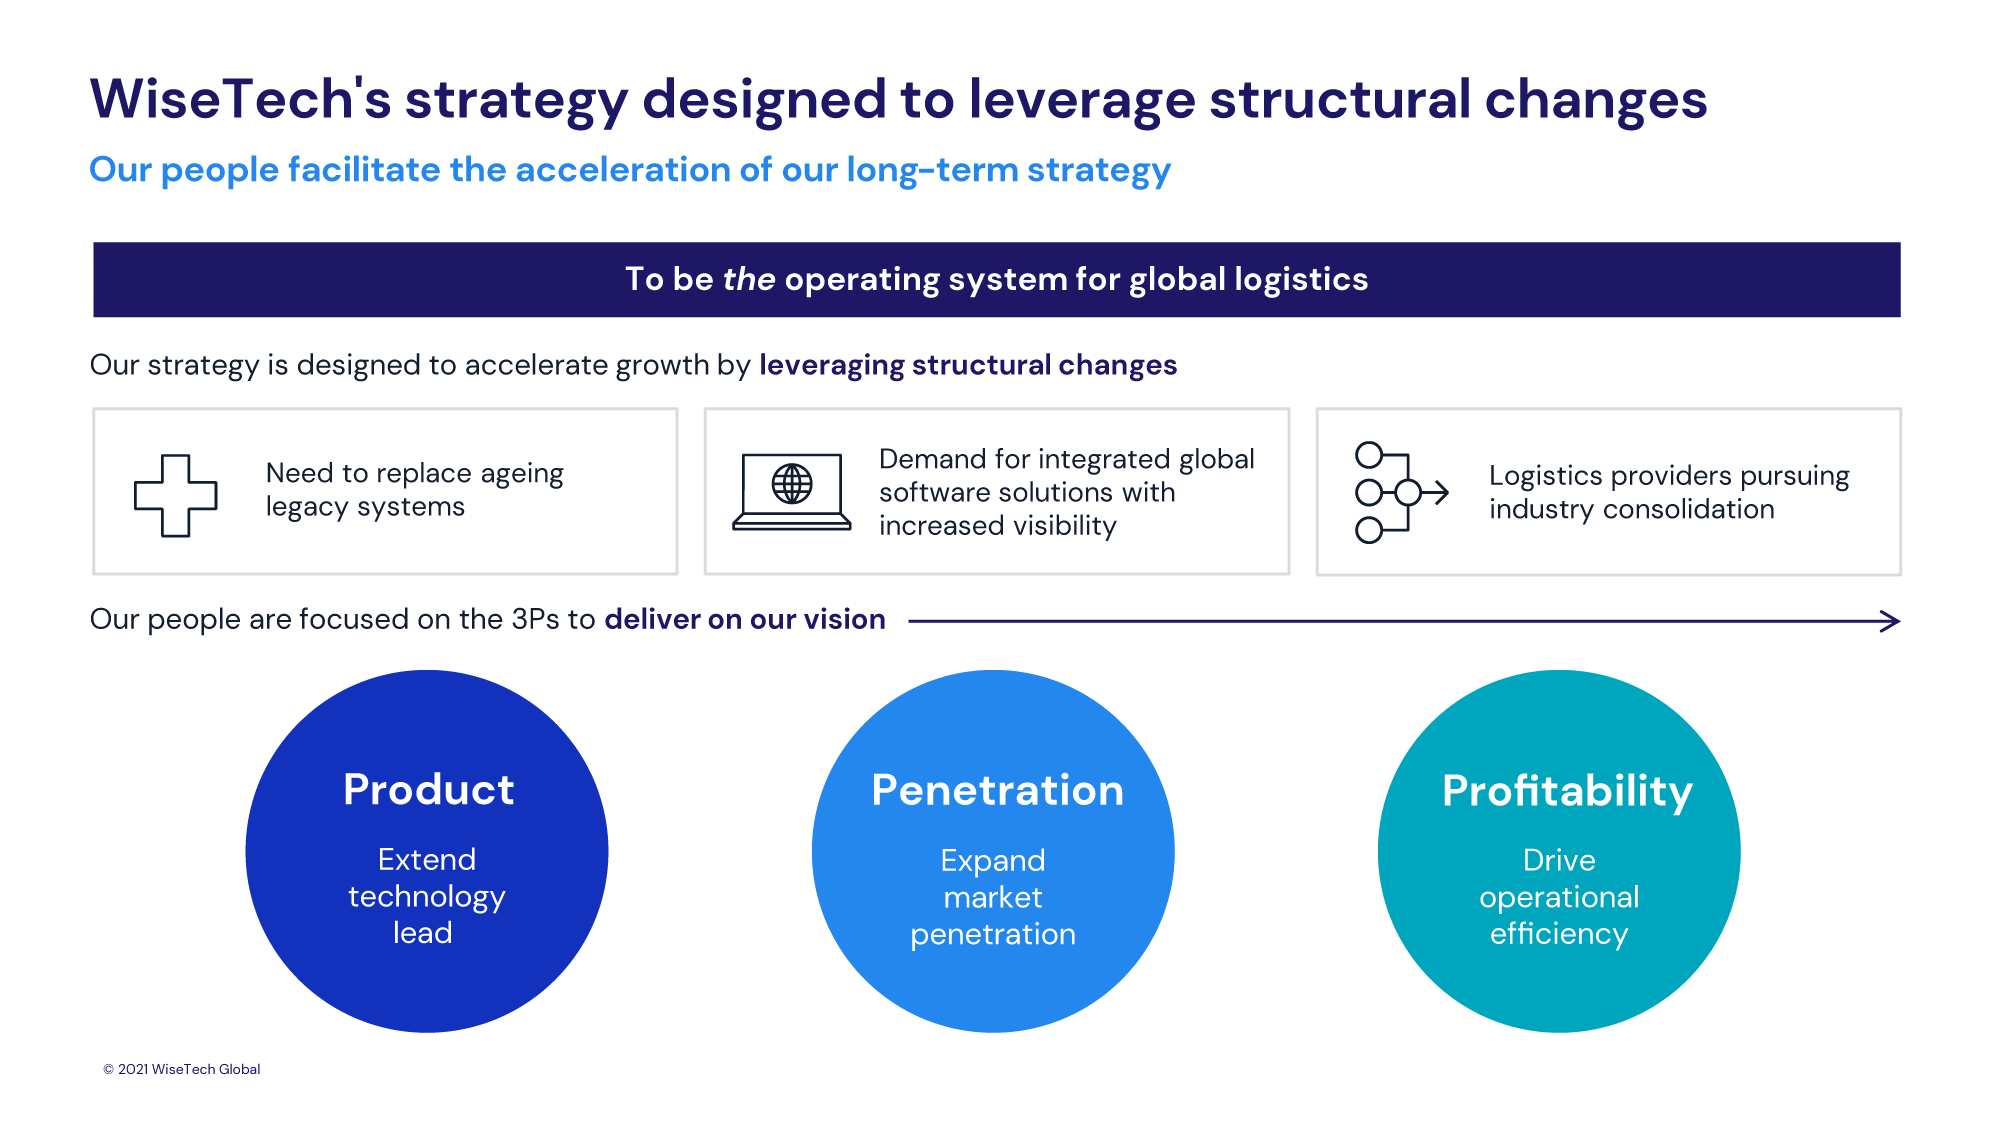 WiseTech's strategy designed to leverage structural changes